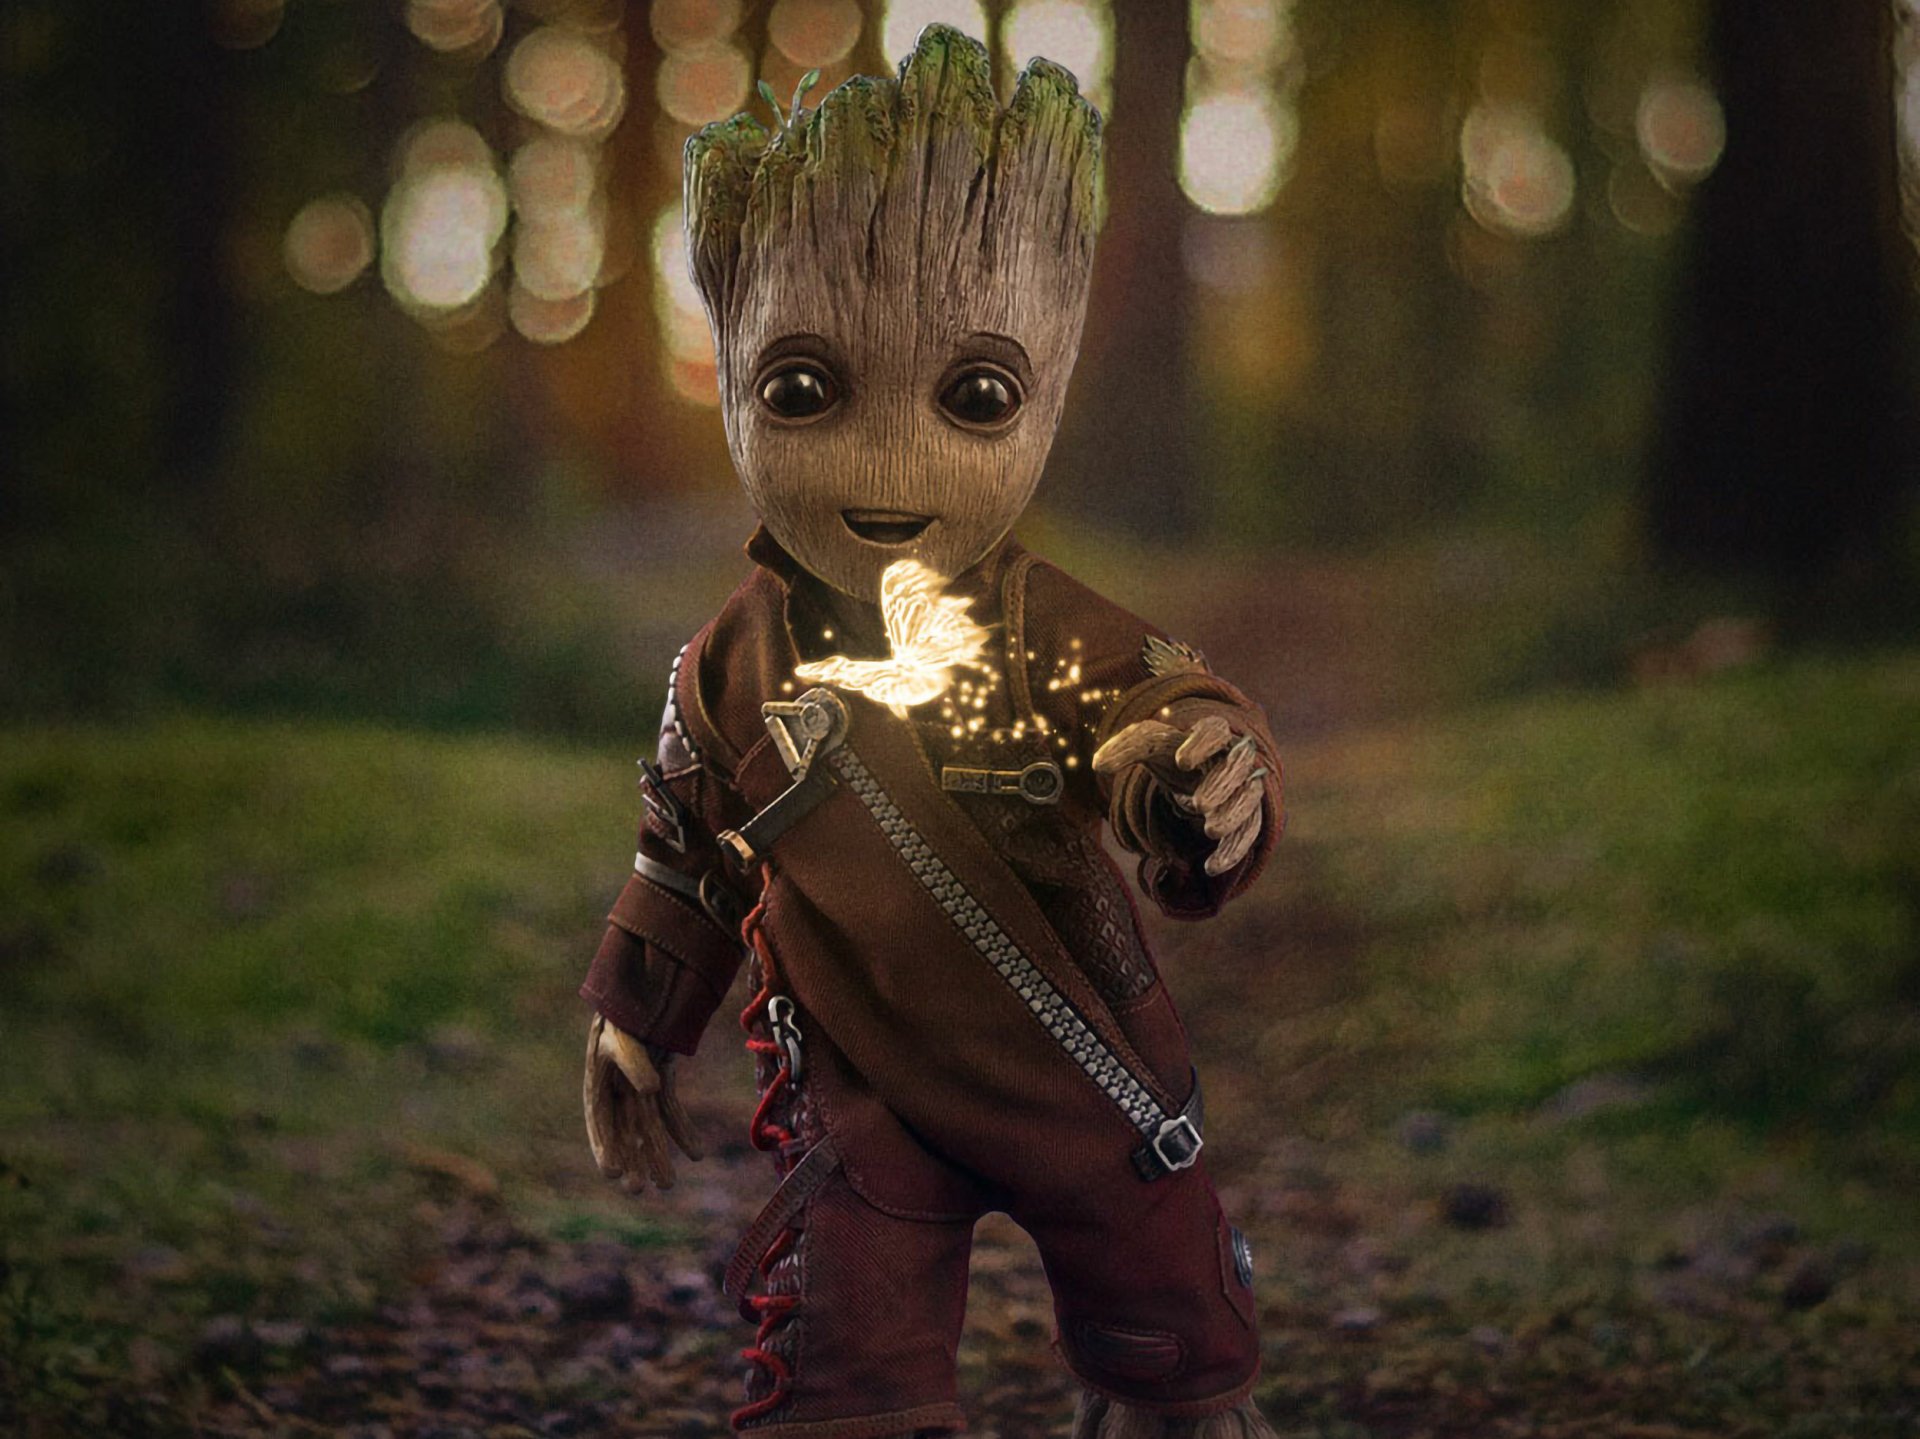 Baby Groot movie Guardians of the Galaxy Vol. 2 Image